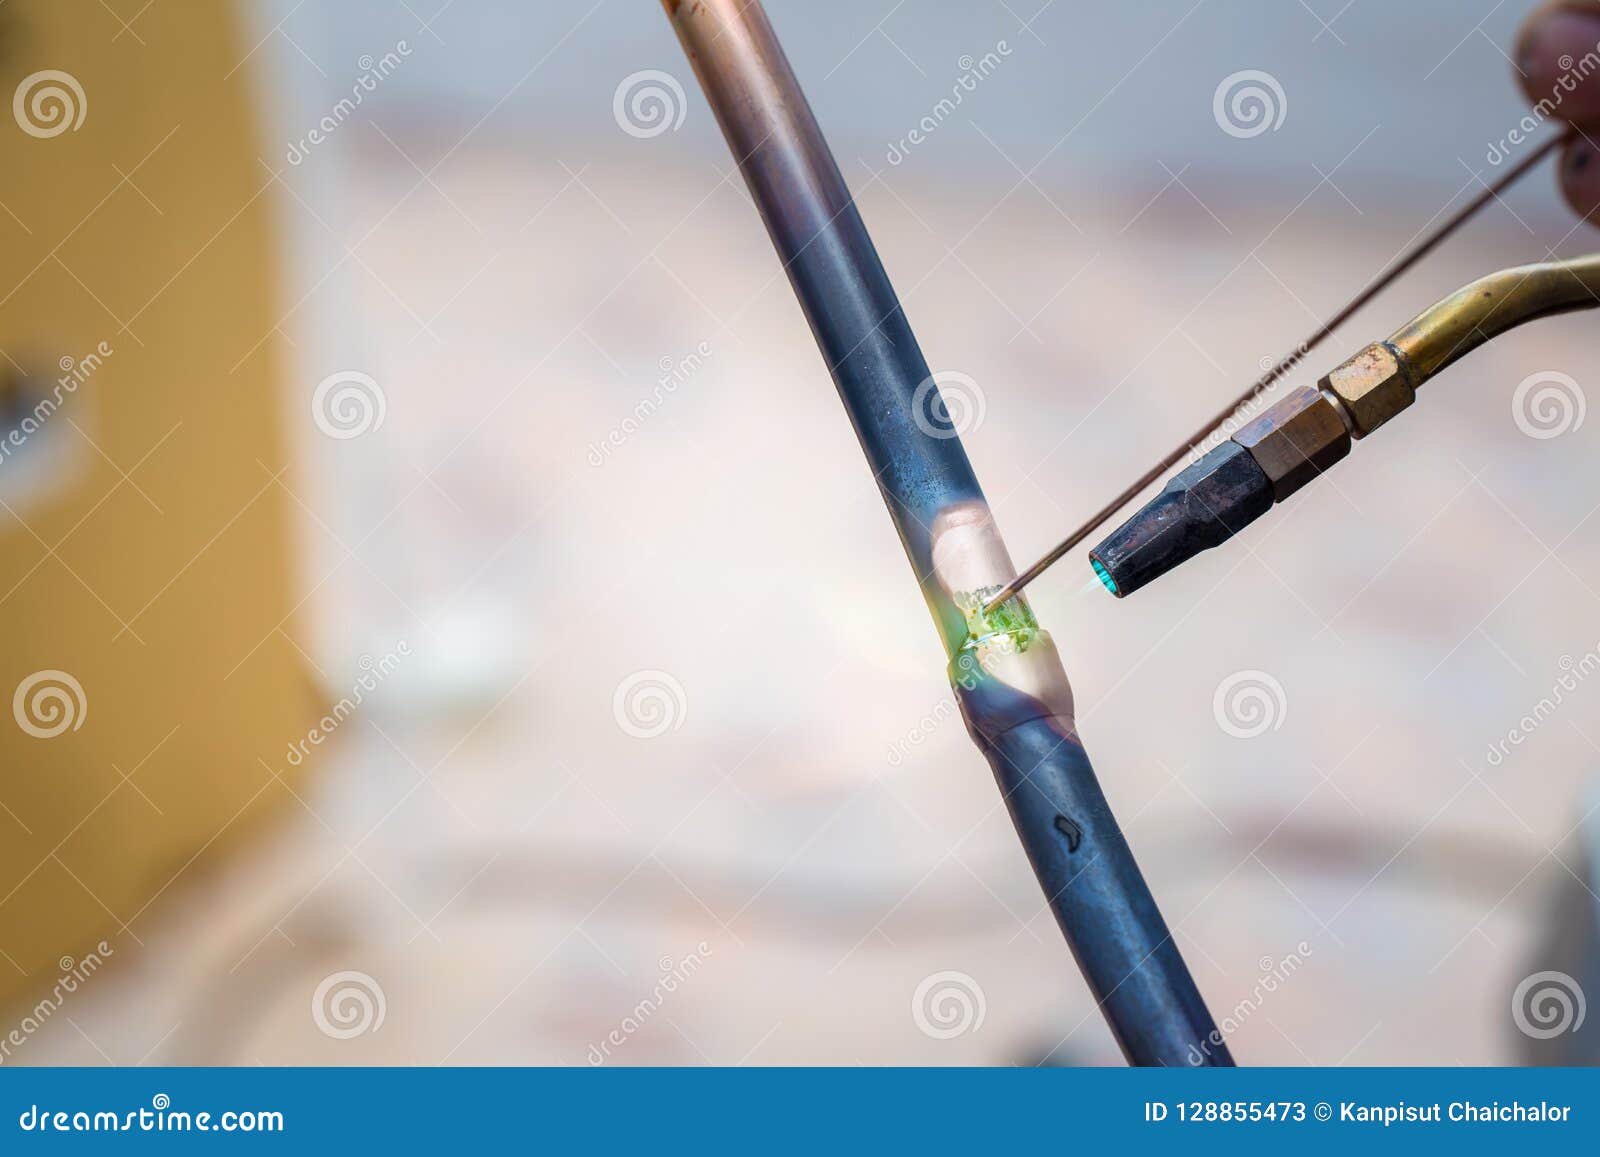 Welding Of Copper Pipe Of A Methane Gas Pipeline Or Of A Conditioning Or Water System Welding Soldering Copper Pipes Stock Image Image Of Cutter Metal 128855473